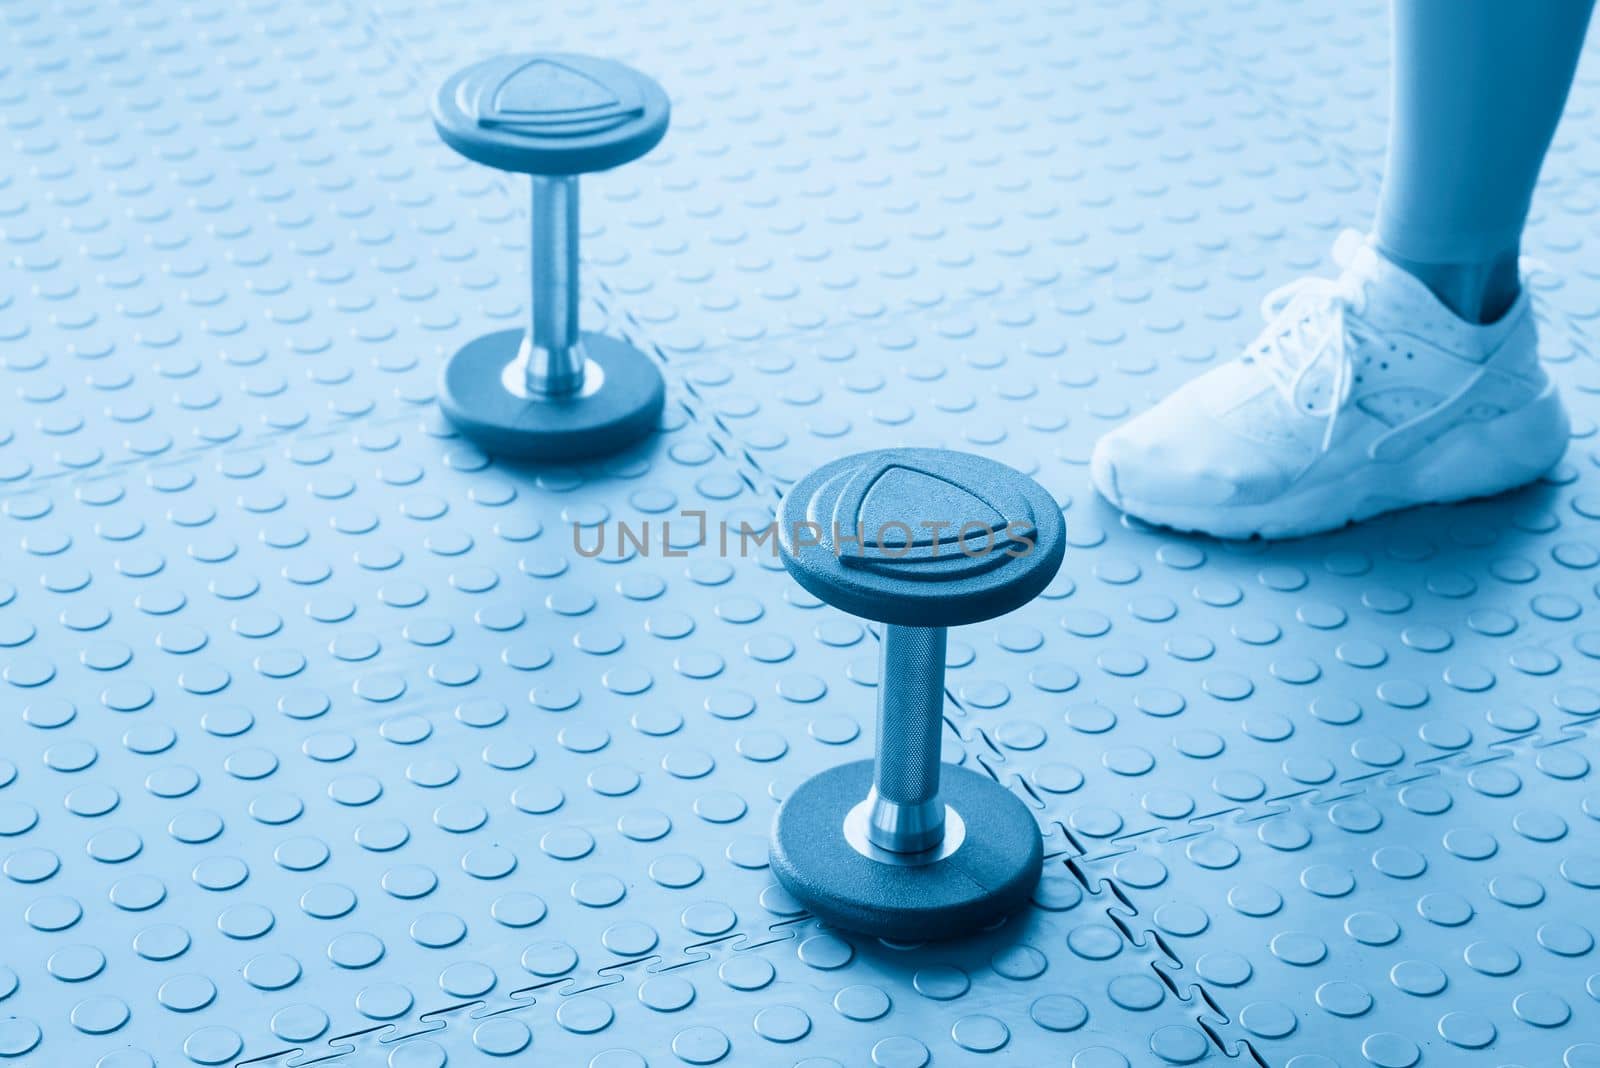 dumbbell exercise weights standing on the floor in gym by Mariakray